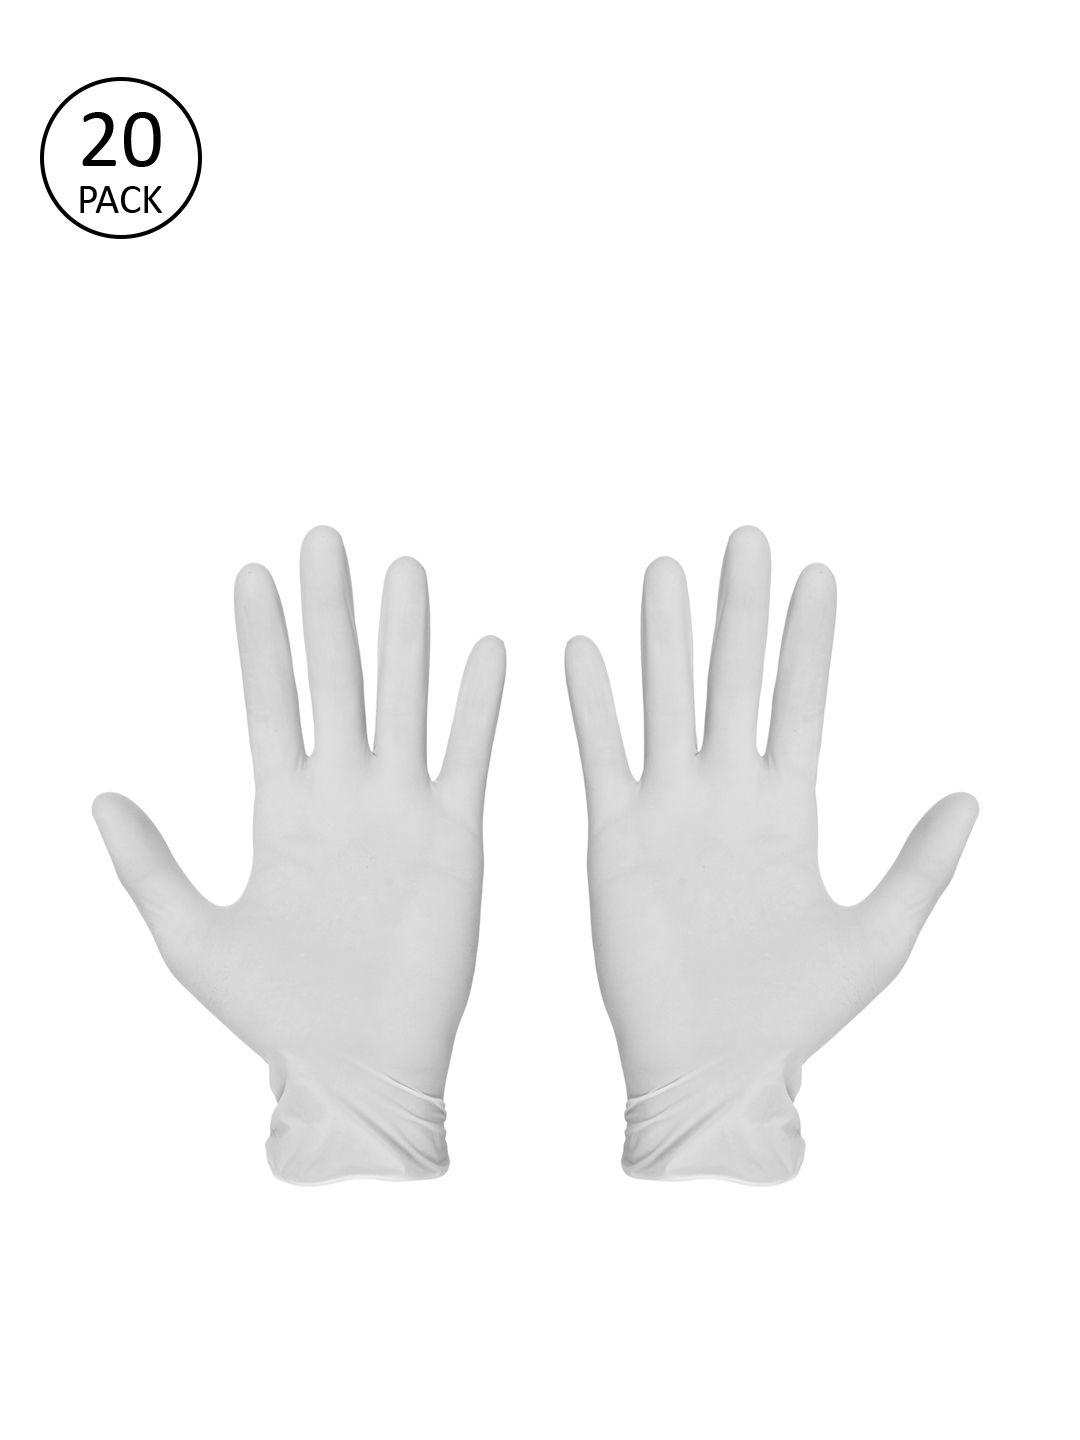 london fashion hob unisex pack of 20 solid surgical disposable hand gloves